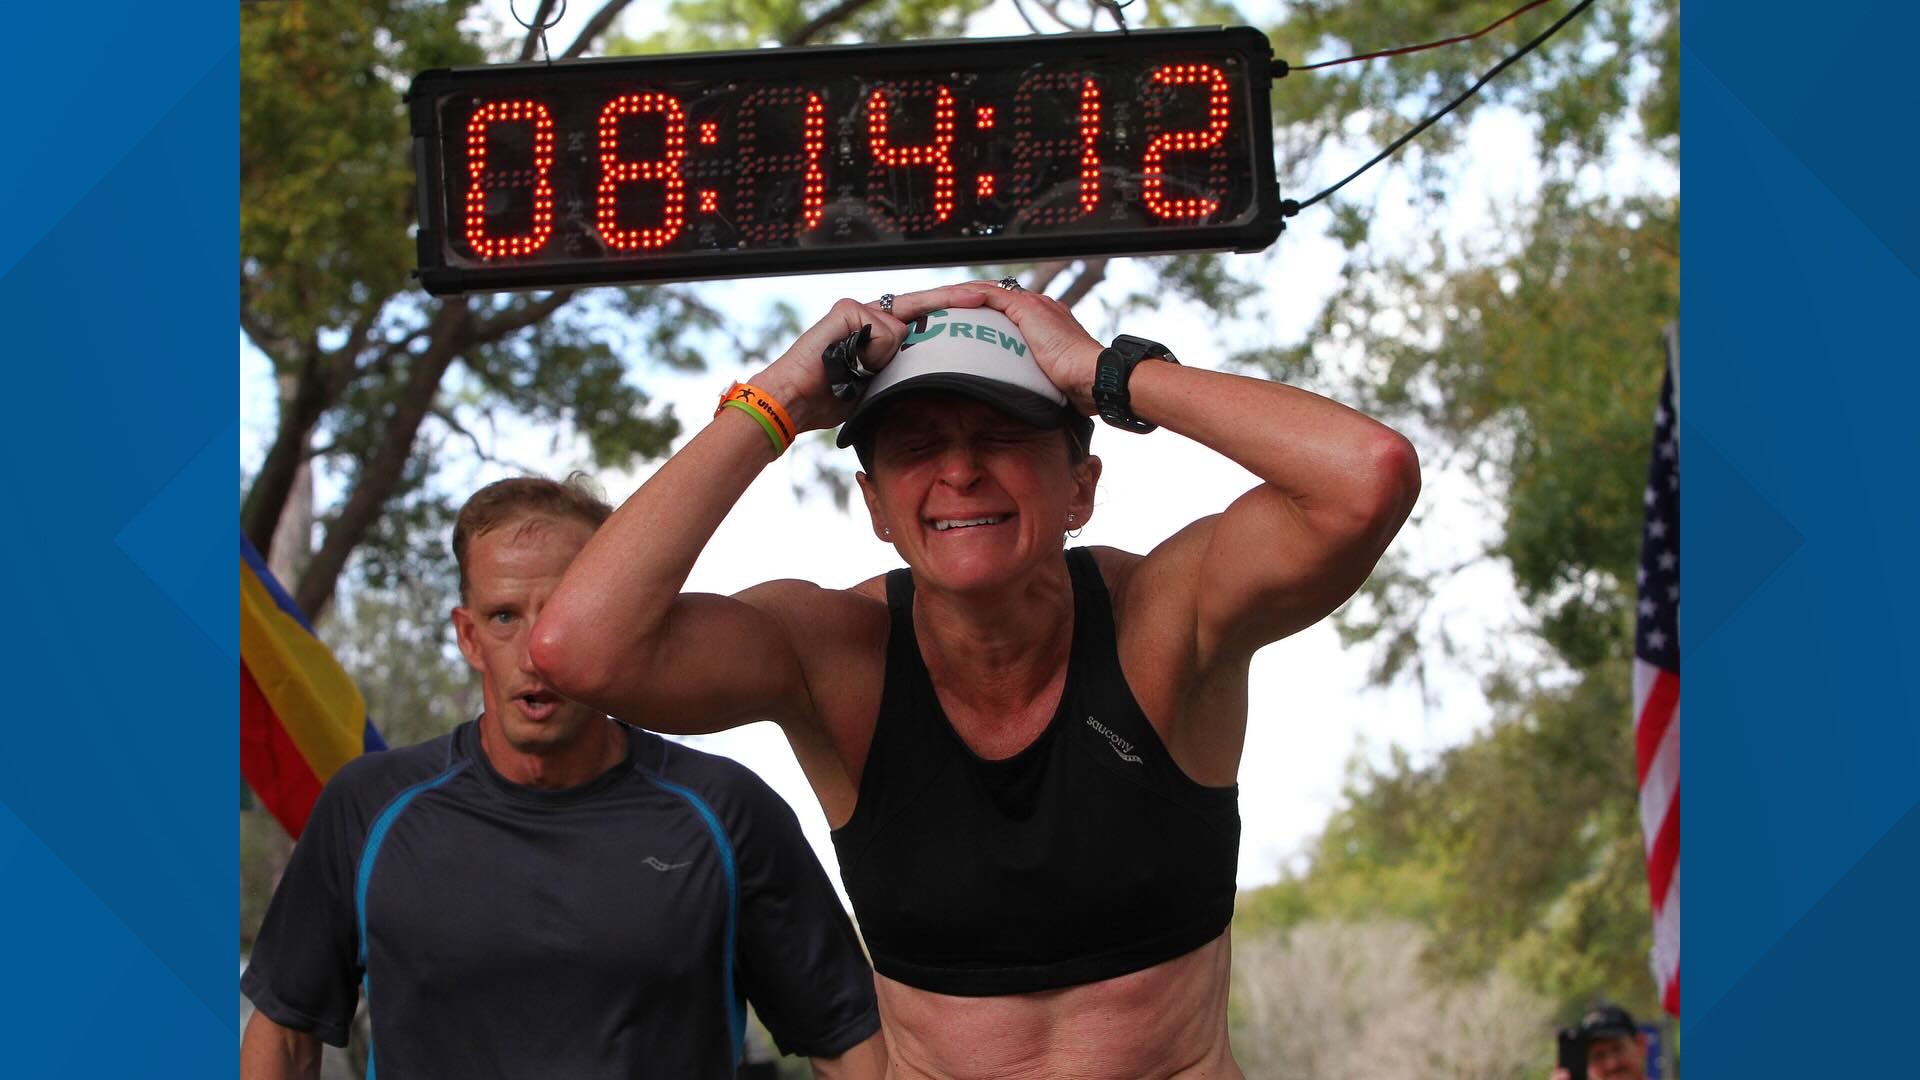 Dede Griesbauer, 53, is an Ultraman World Champion and record holder. She started racing as a pro at 35-years-old.